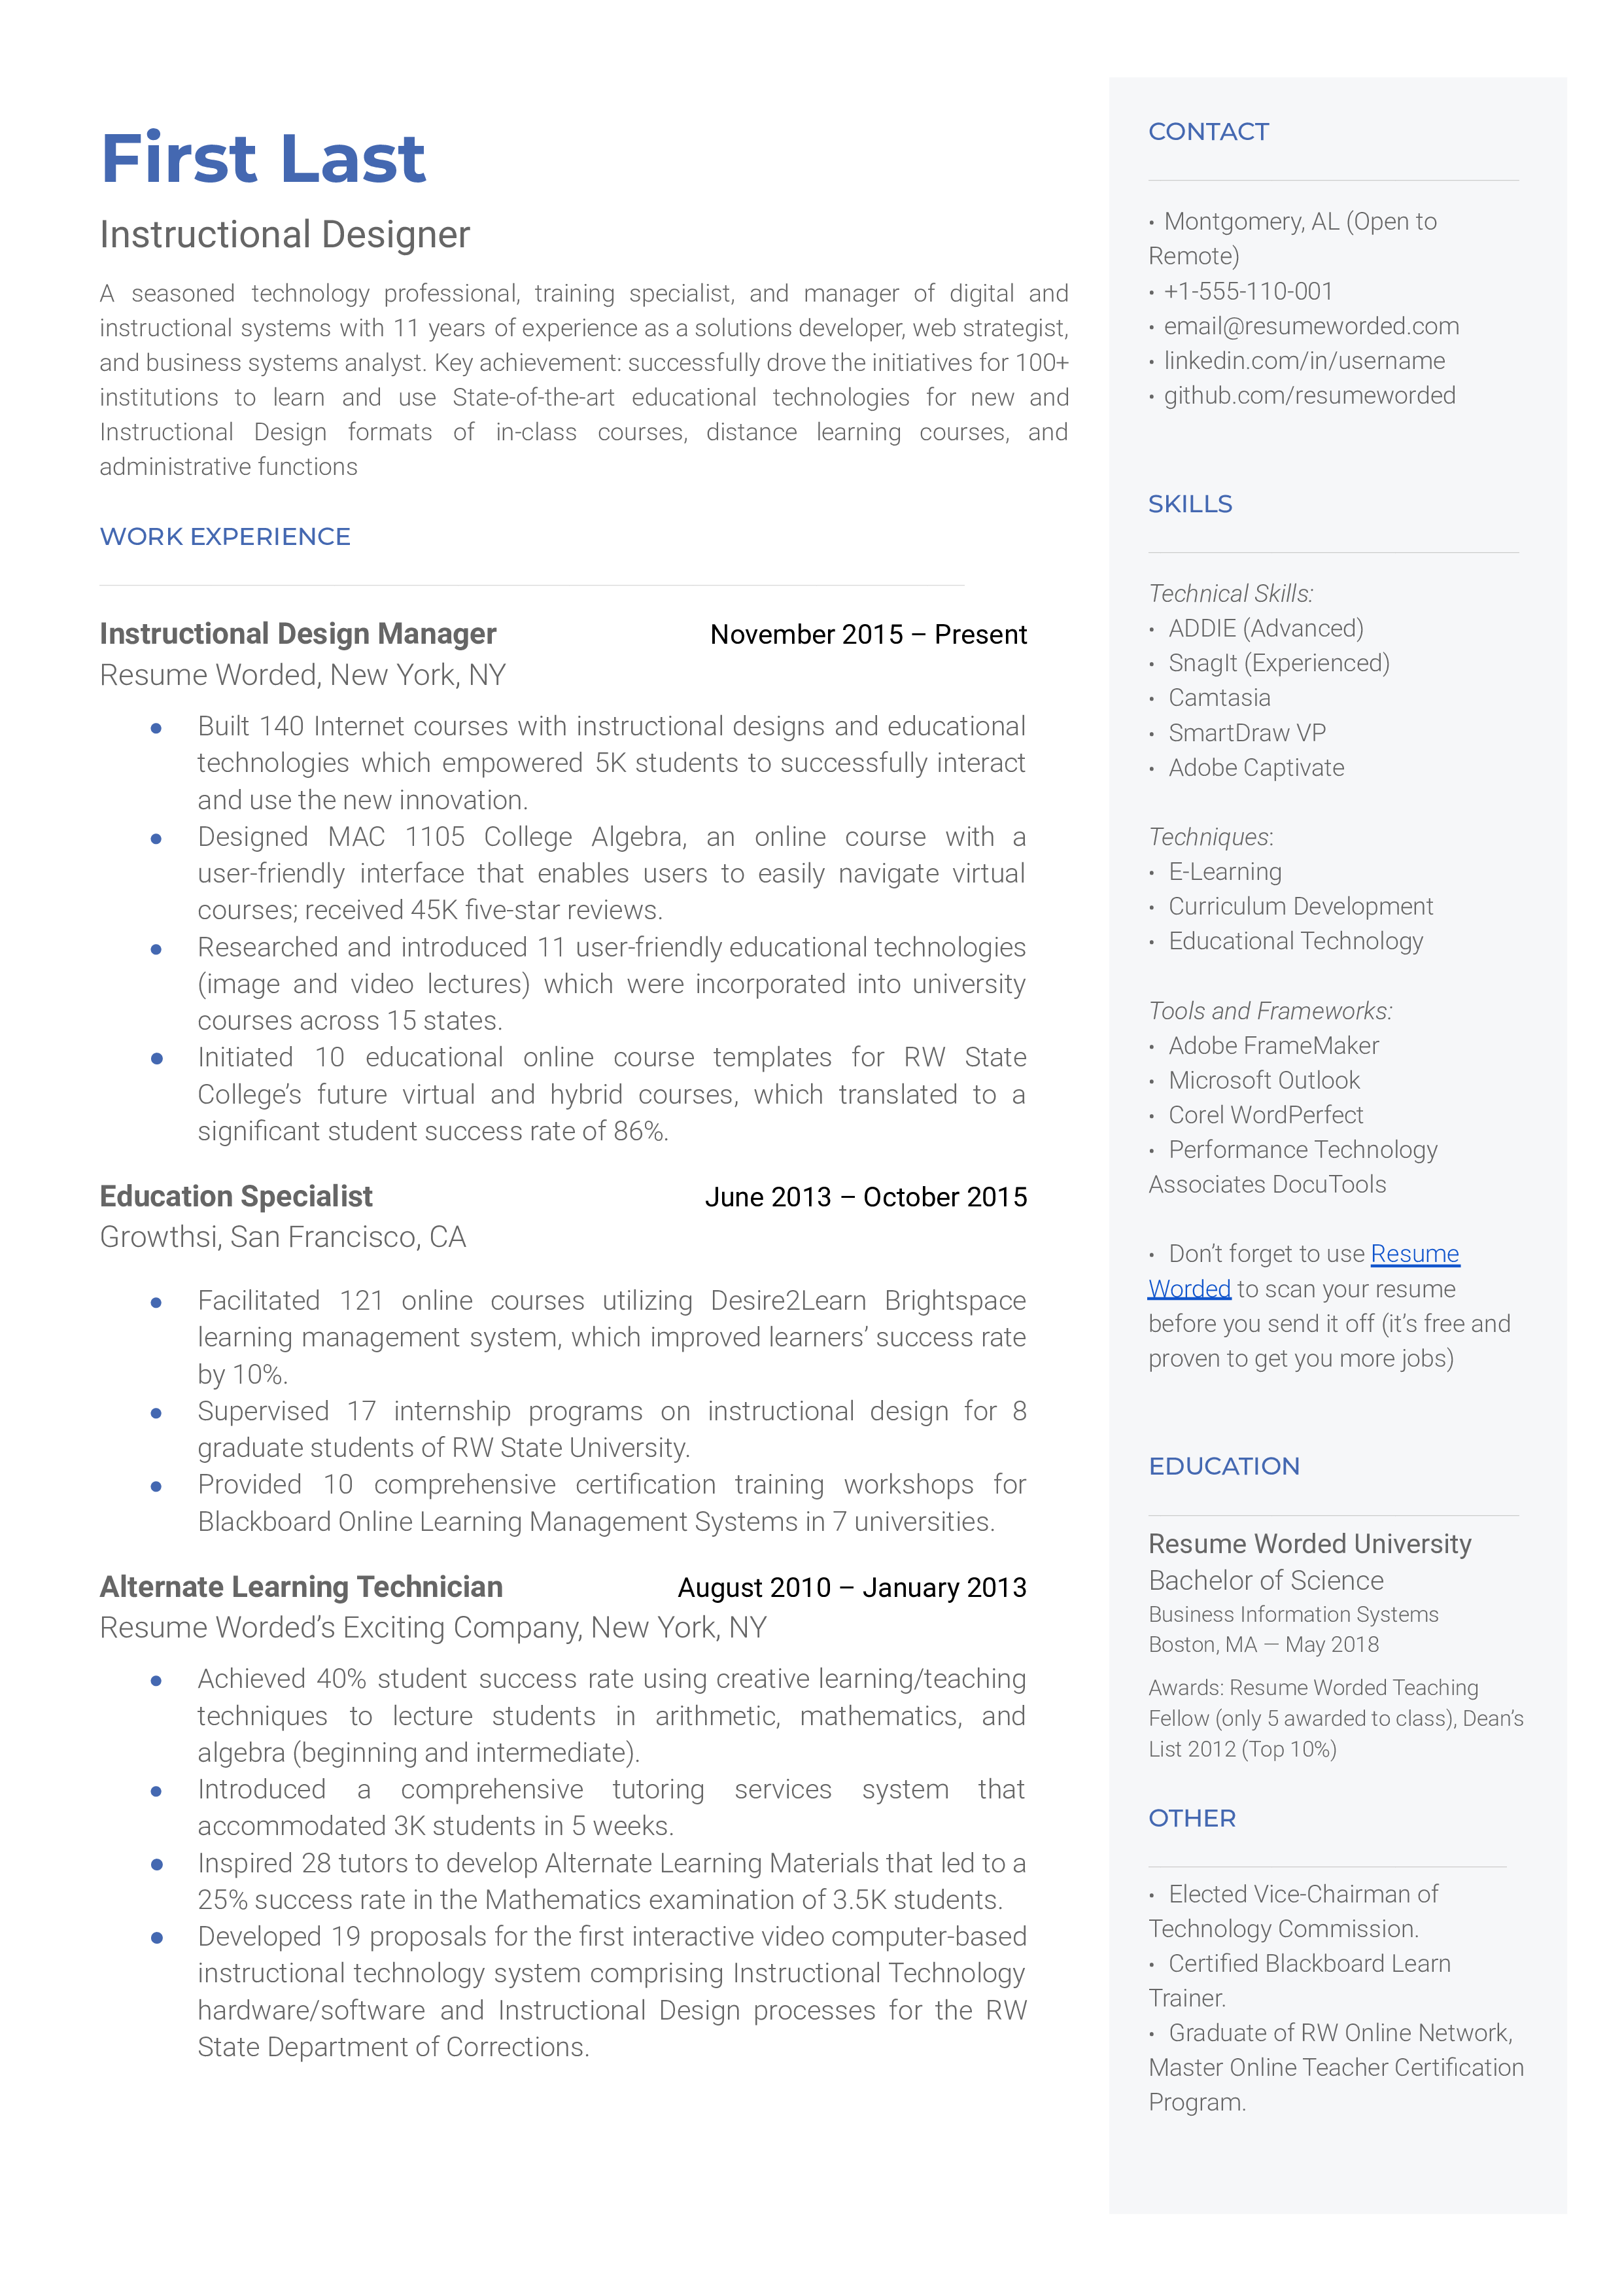 A well-structured CV of an Instructional Designer showcasing proficiency in modern tools and inclusive content design.